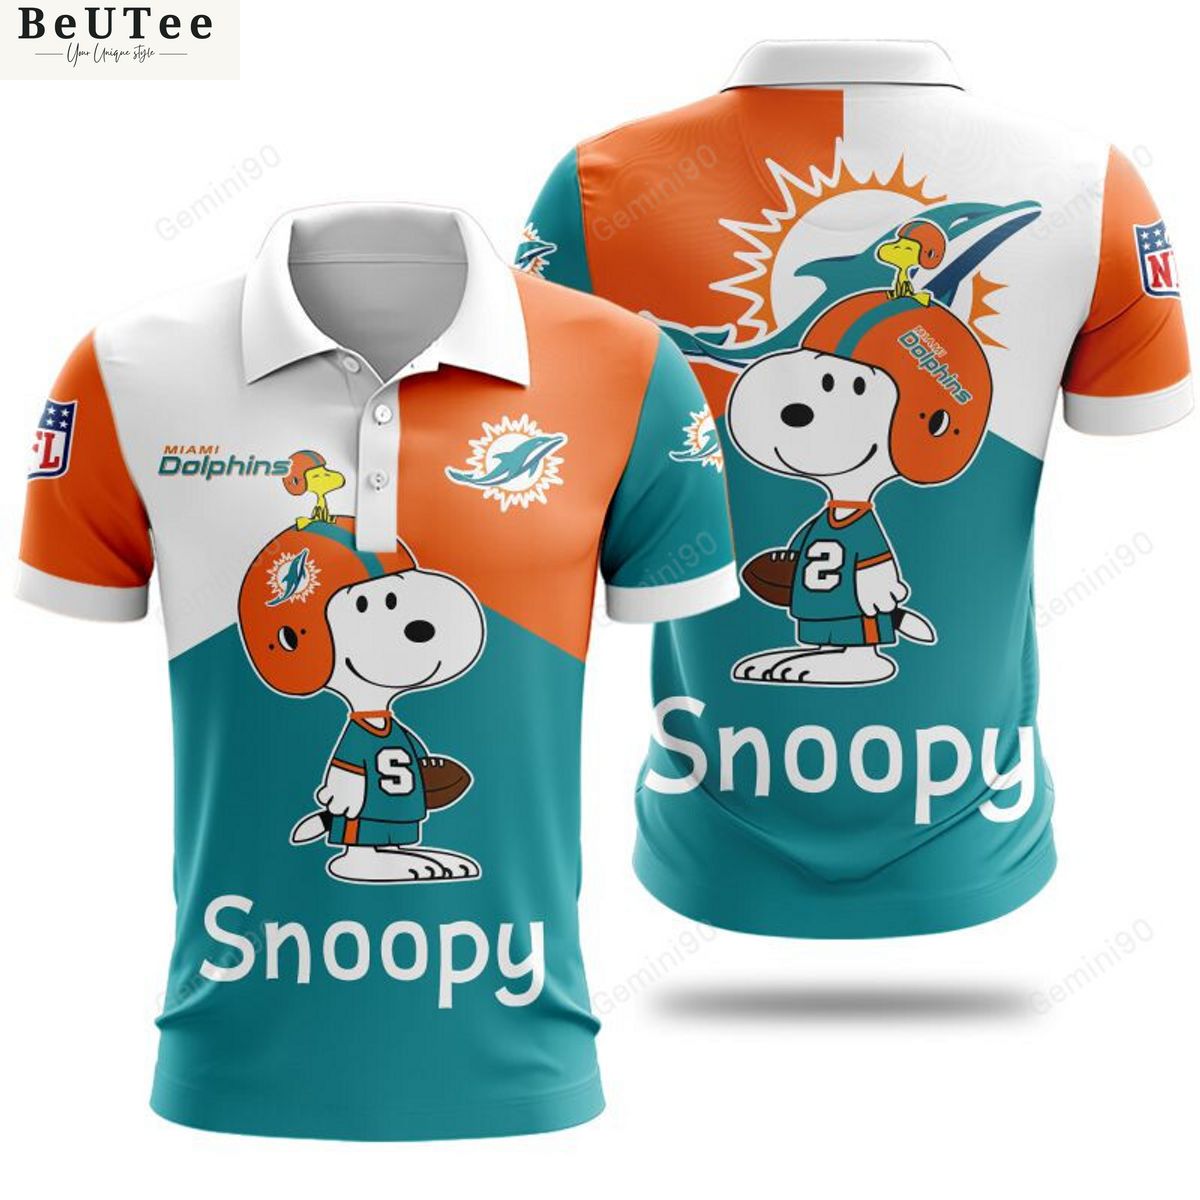 NFL Miami Dolphins Snoopy 3D Hoodie Tshirt Polo Looking so nice